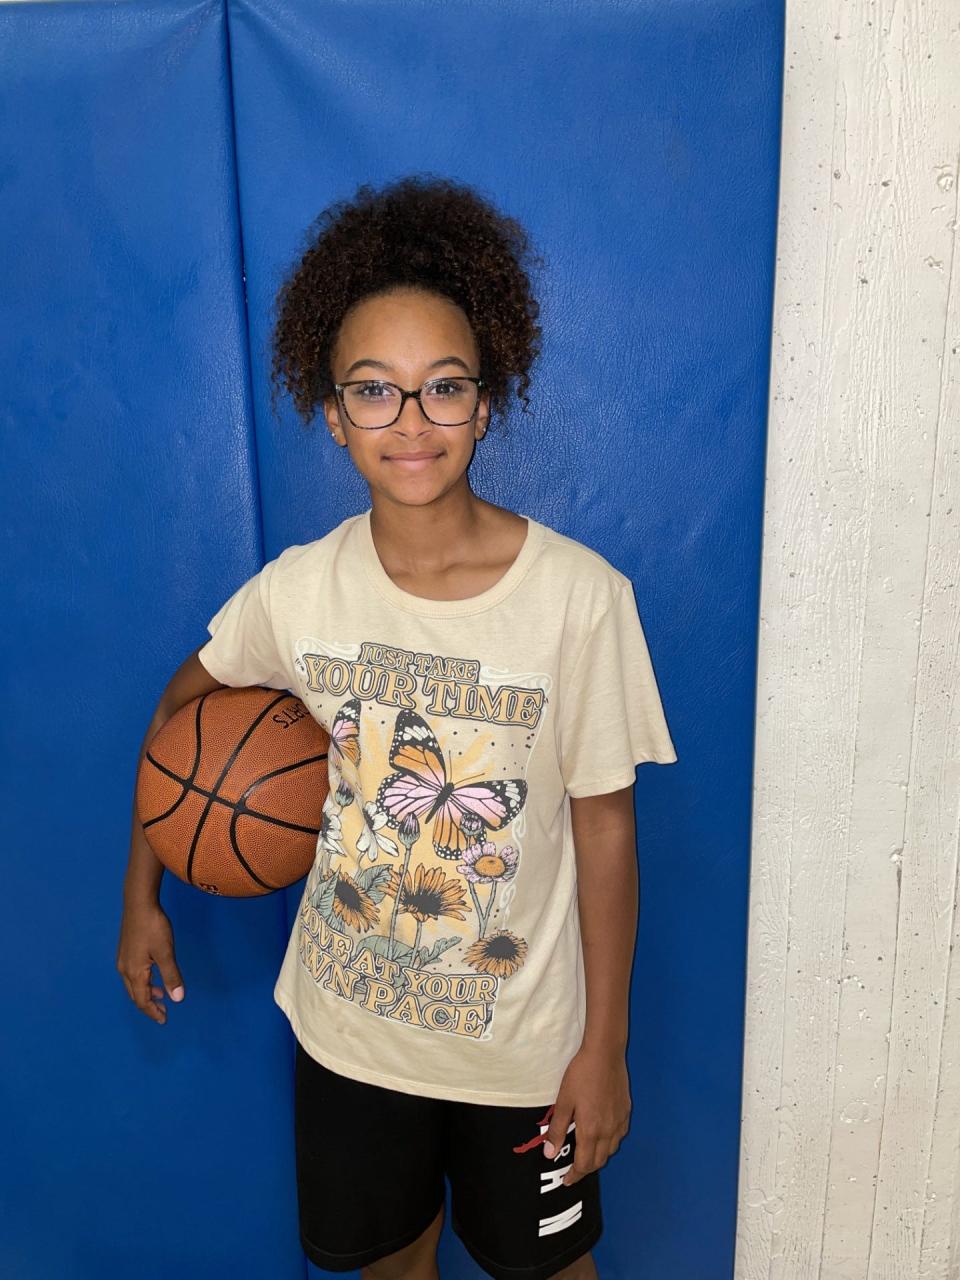 Bay Trail student Saniyya Willis is one of many happy campers. This was her second time attending the annual Thomas Bryant Basketball Camp.